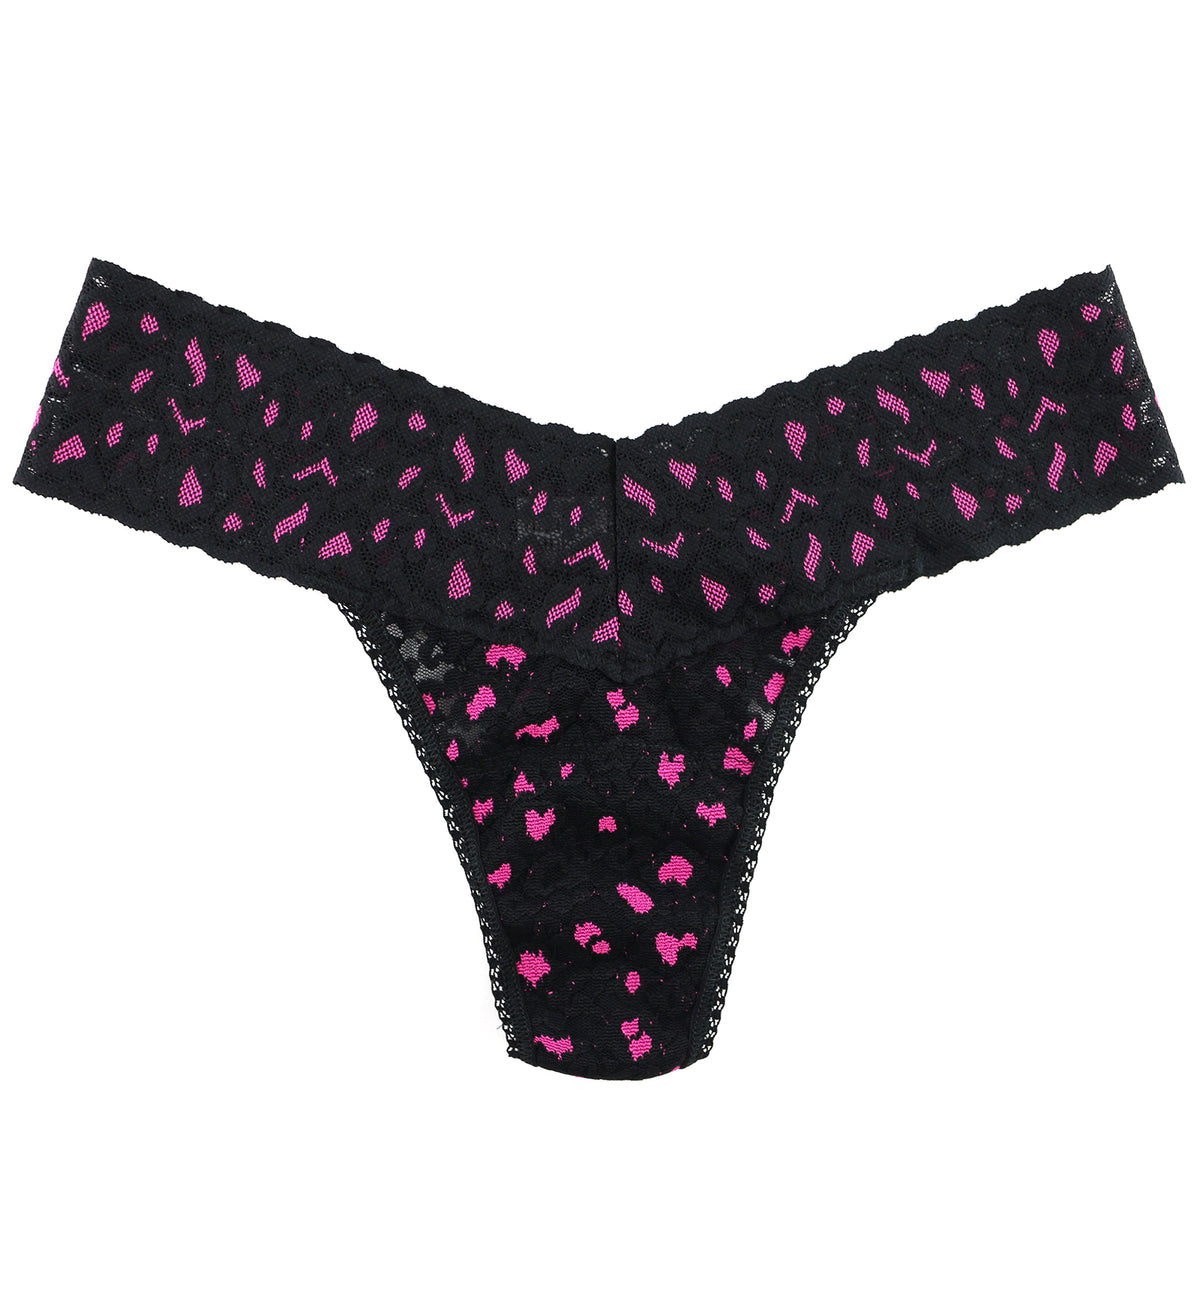 Hanky Panky Cross Dyed Leopard Low Rise Thong (7J1051P),Black/Tulip Pink - Black/Tulip Pink,One Size